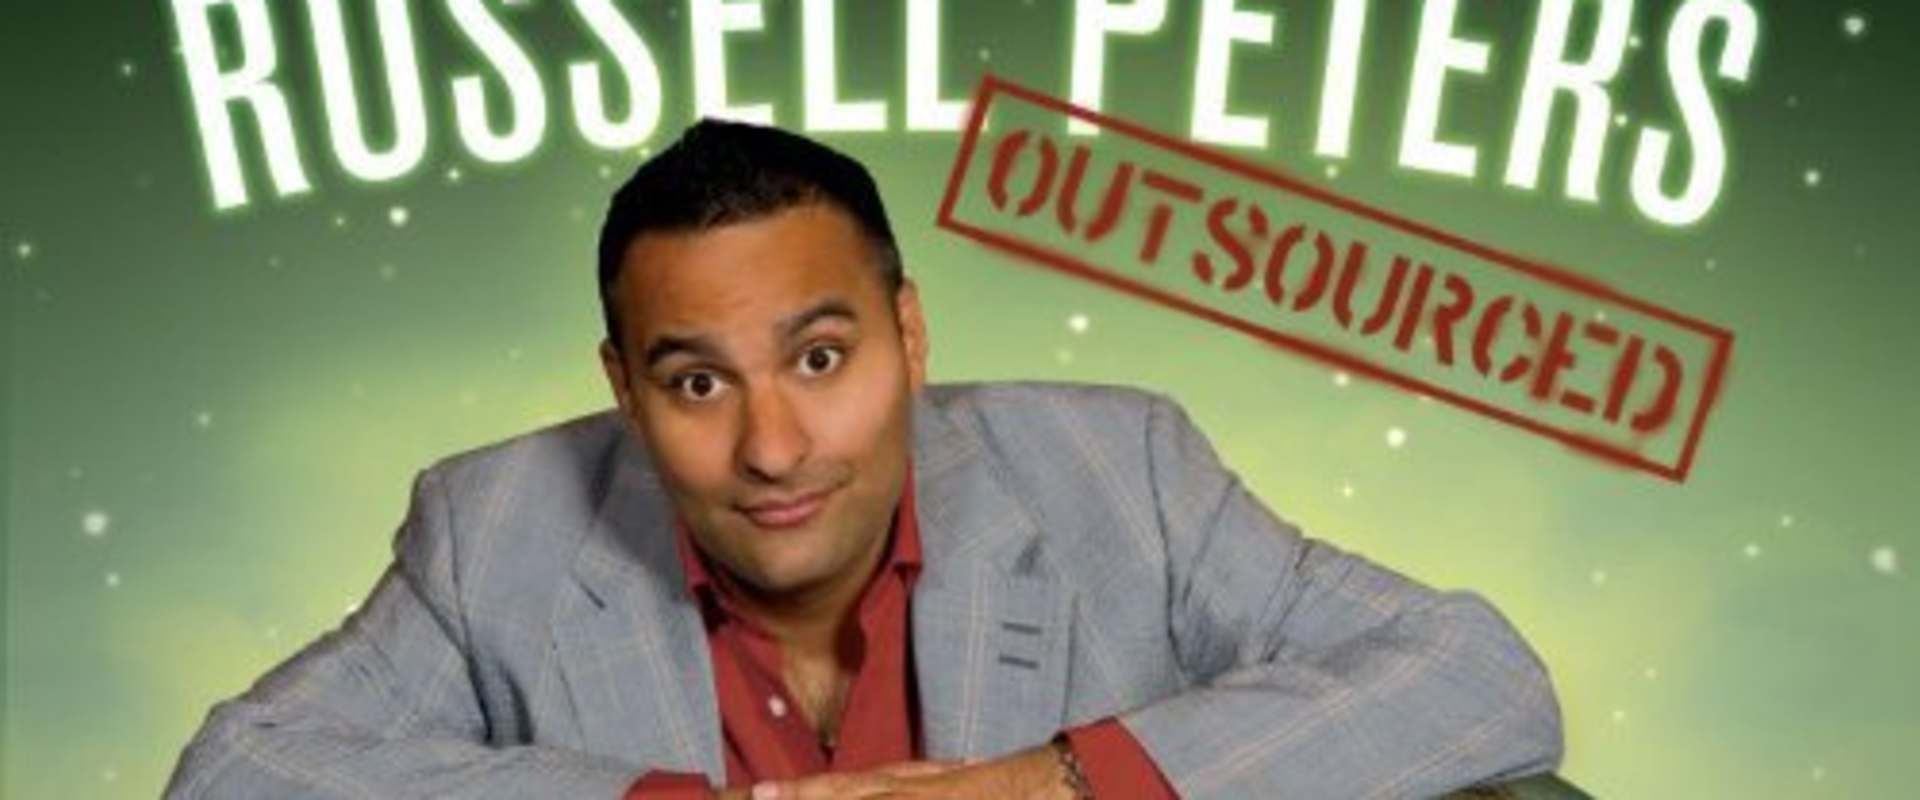 Russell Peters: Outsourced background 1